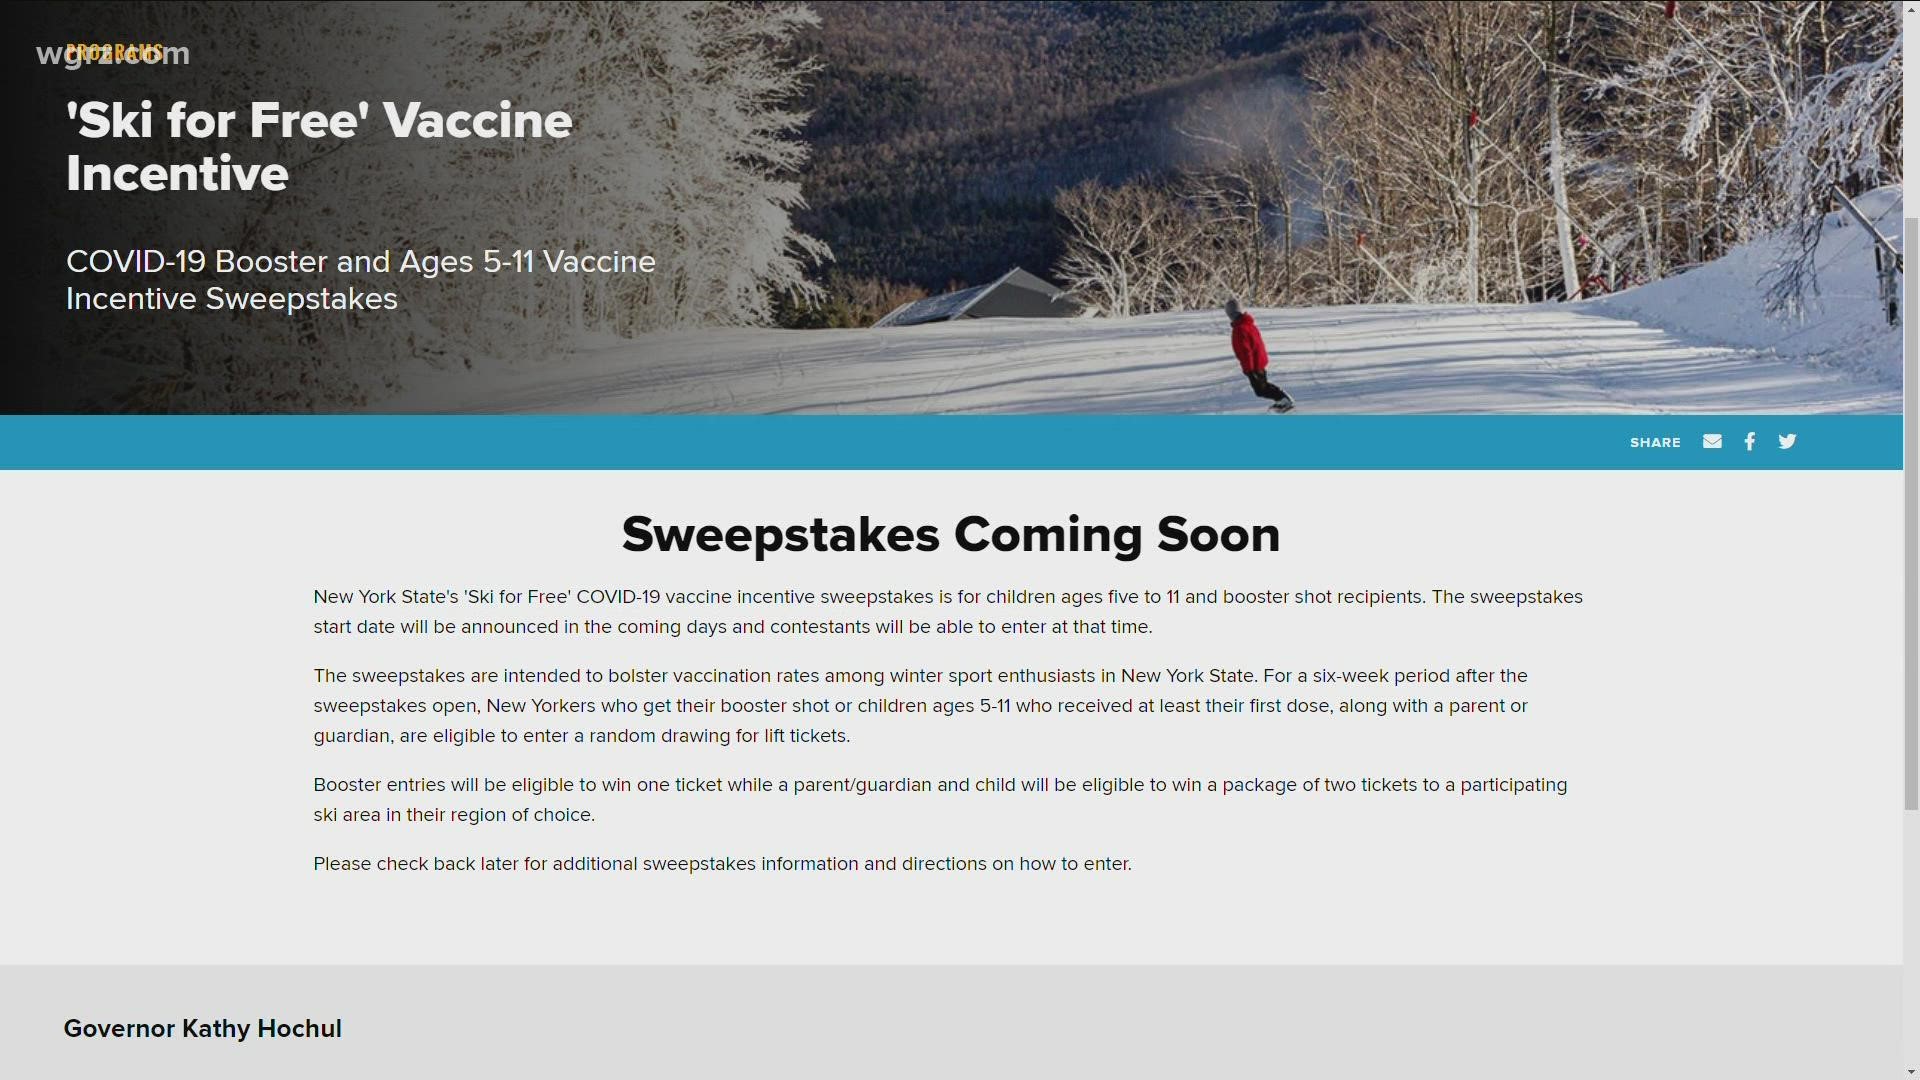 'Ski for Free' sweepstakes for kids age 5-11 who get the COVID-19 vaccine